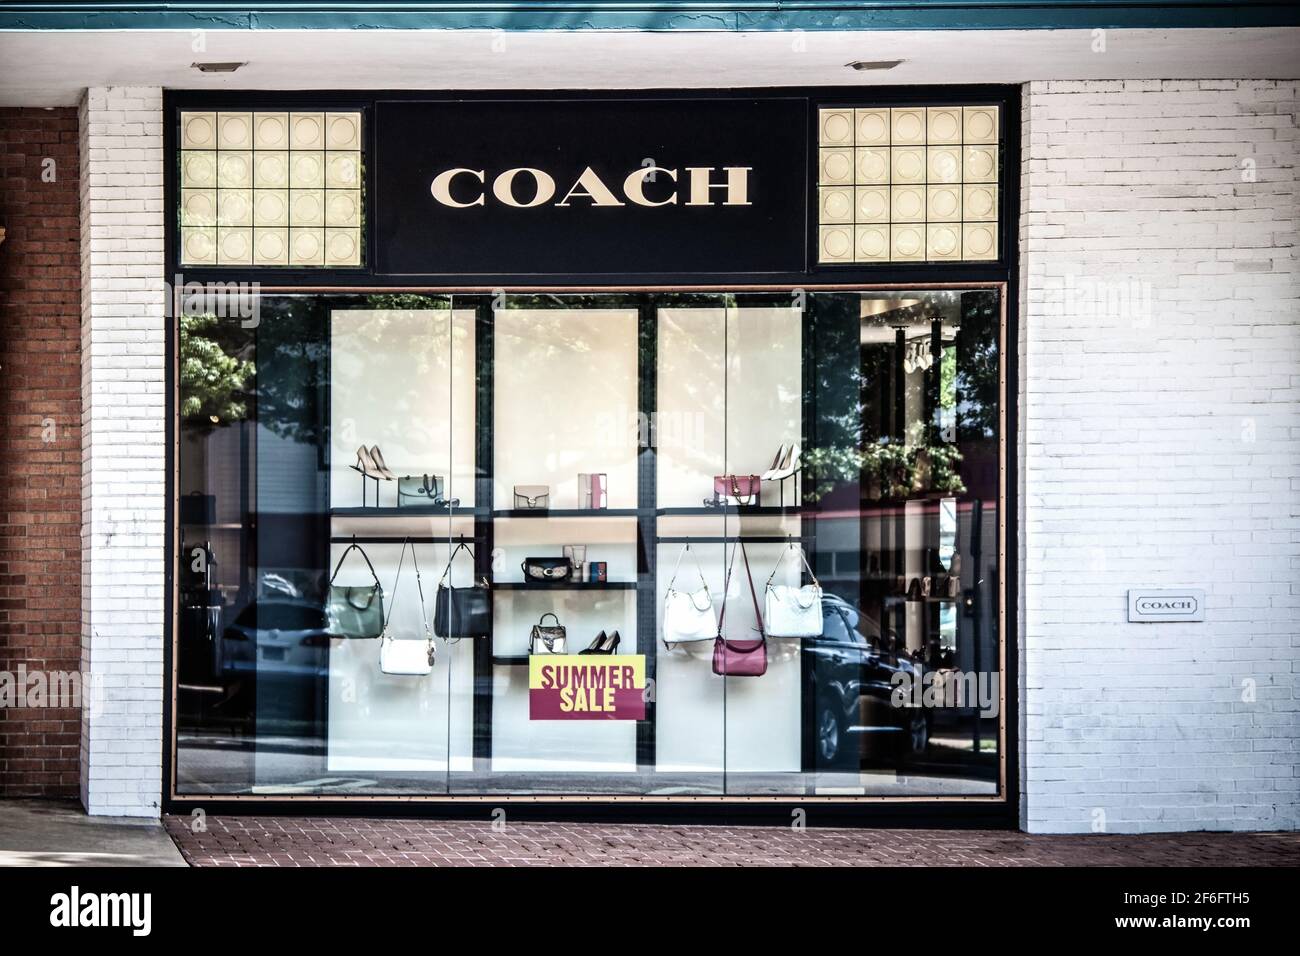 2020 07 14 Tulsa USA - Display window of Coach store with Summer Sale sign  and reflections of cars and trees Stock Photo - Alamy